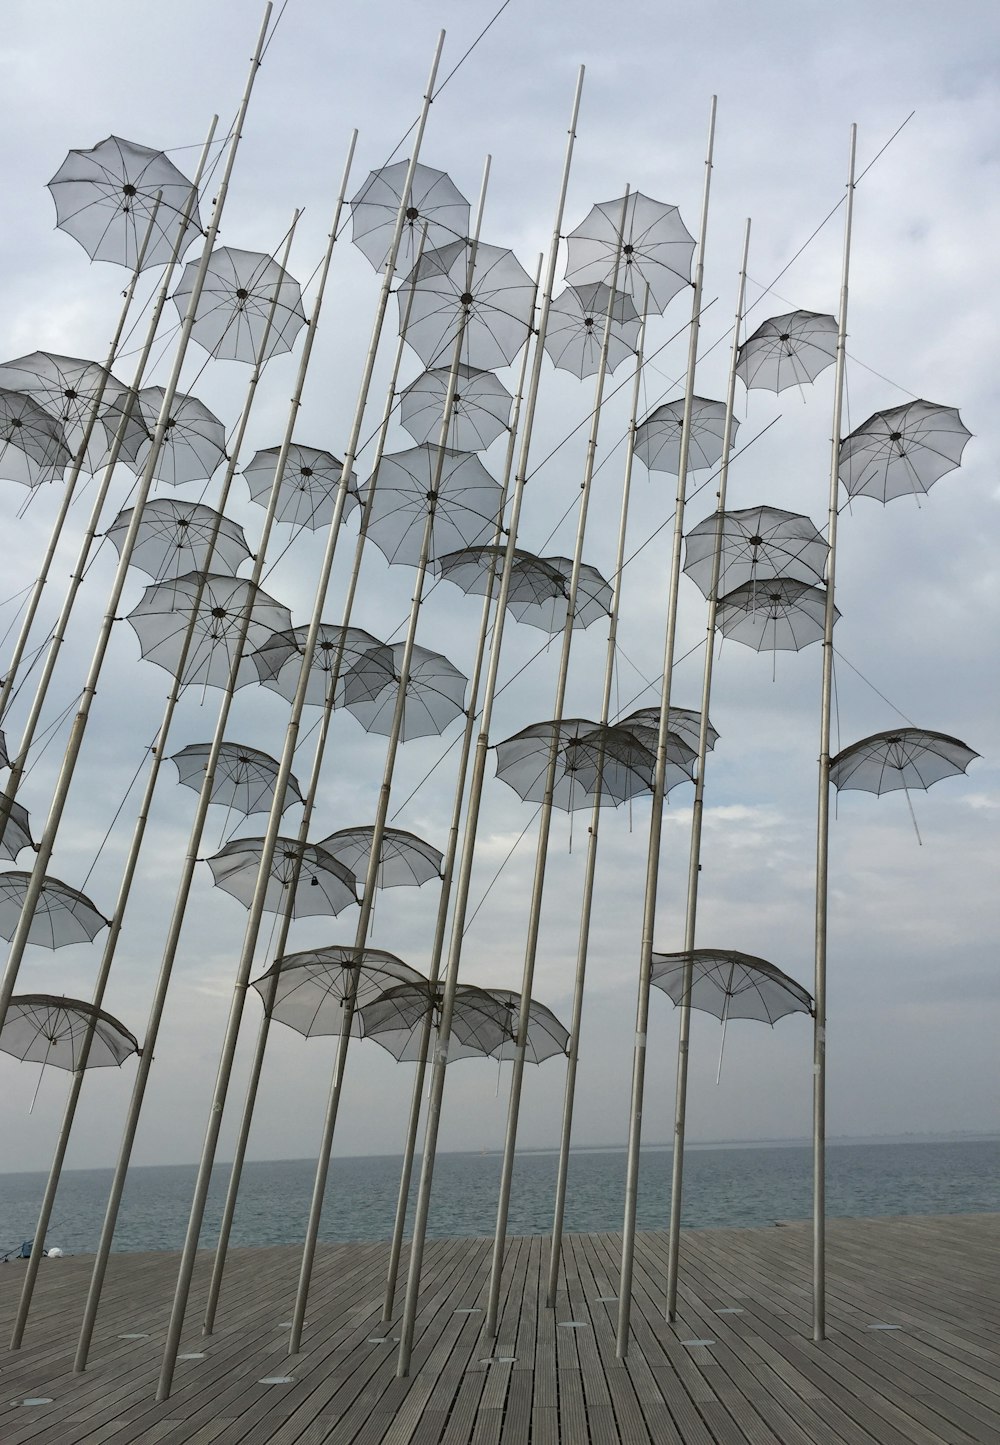 a bunch of umbrellas that are on a pole